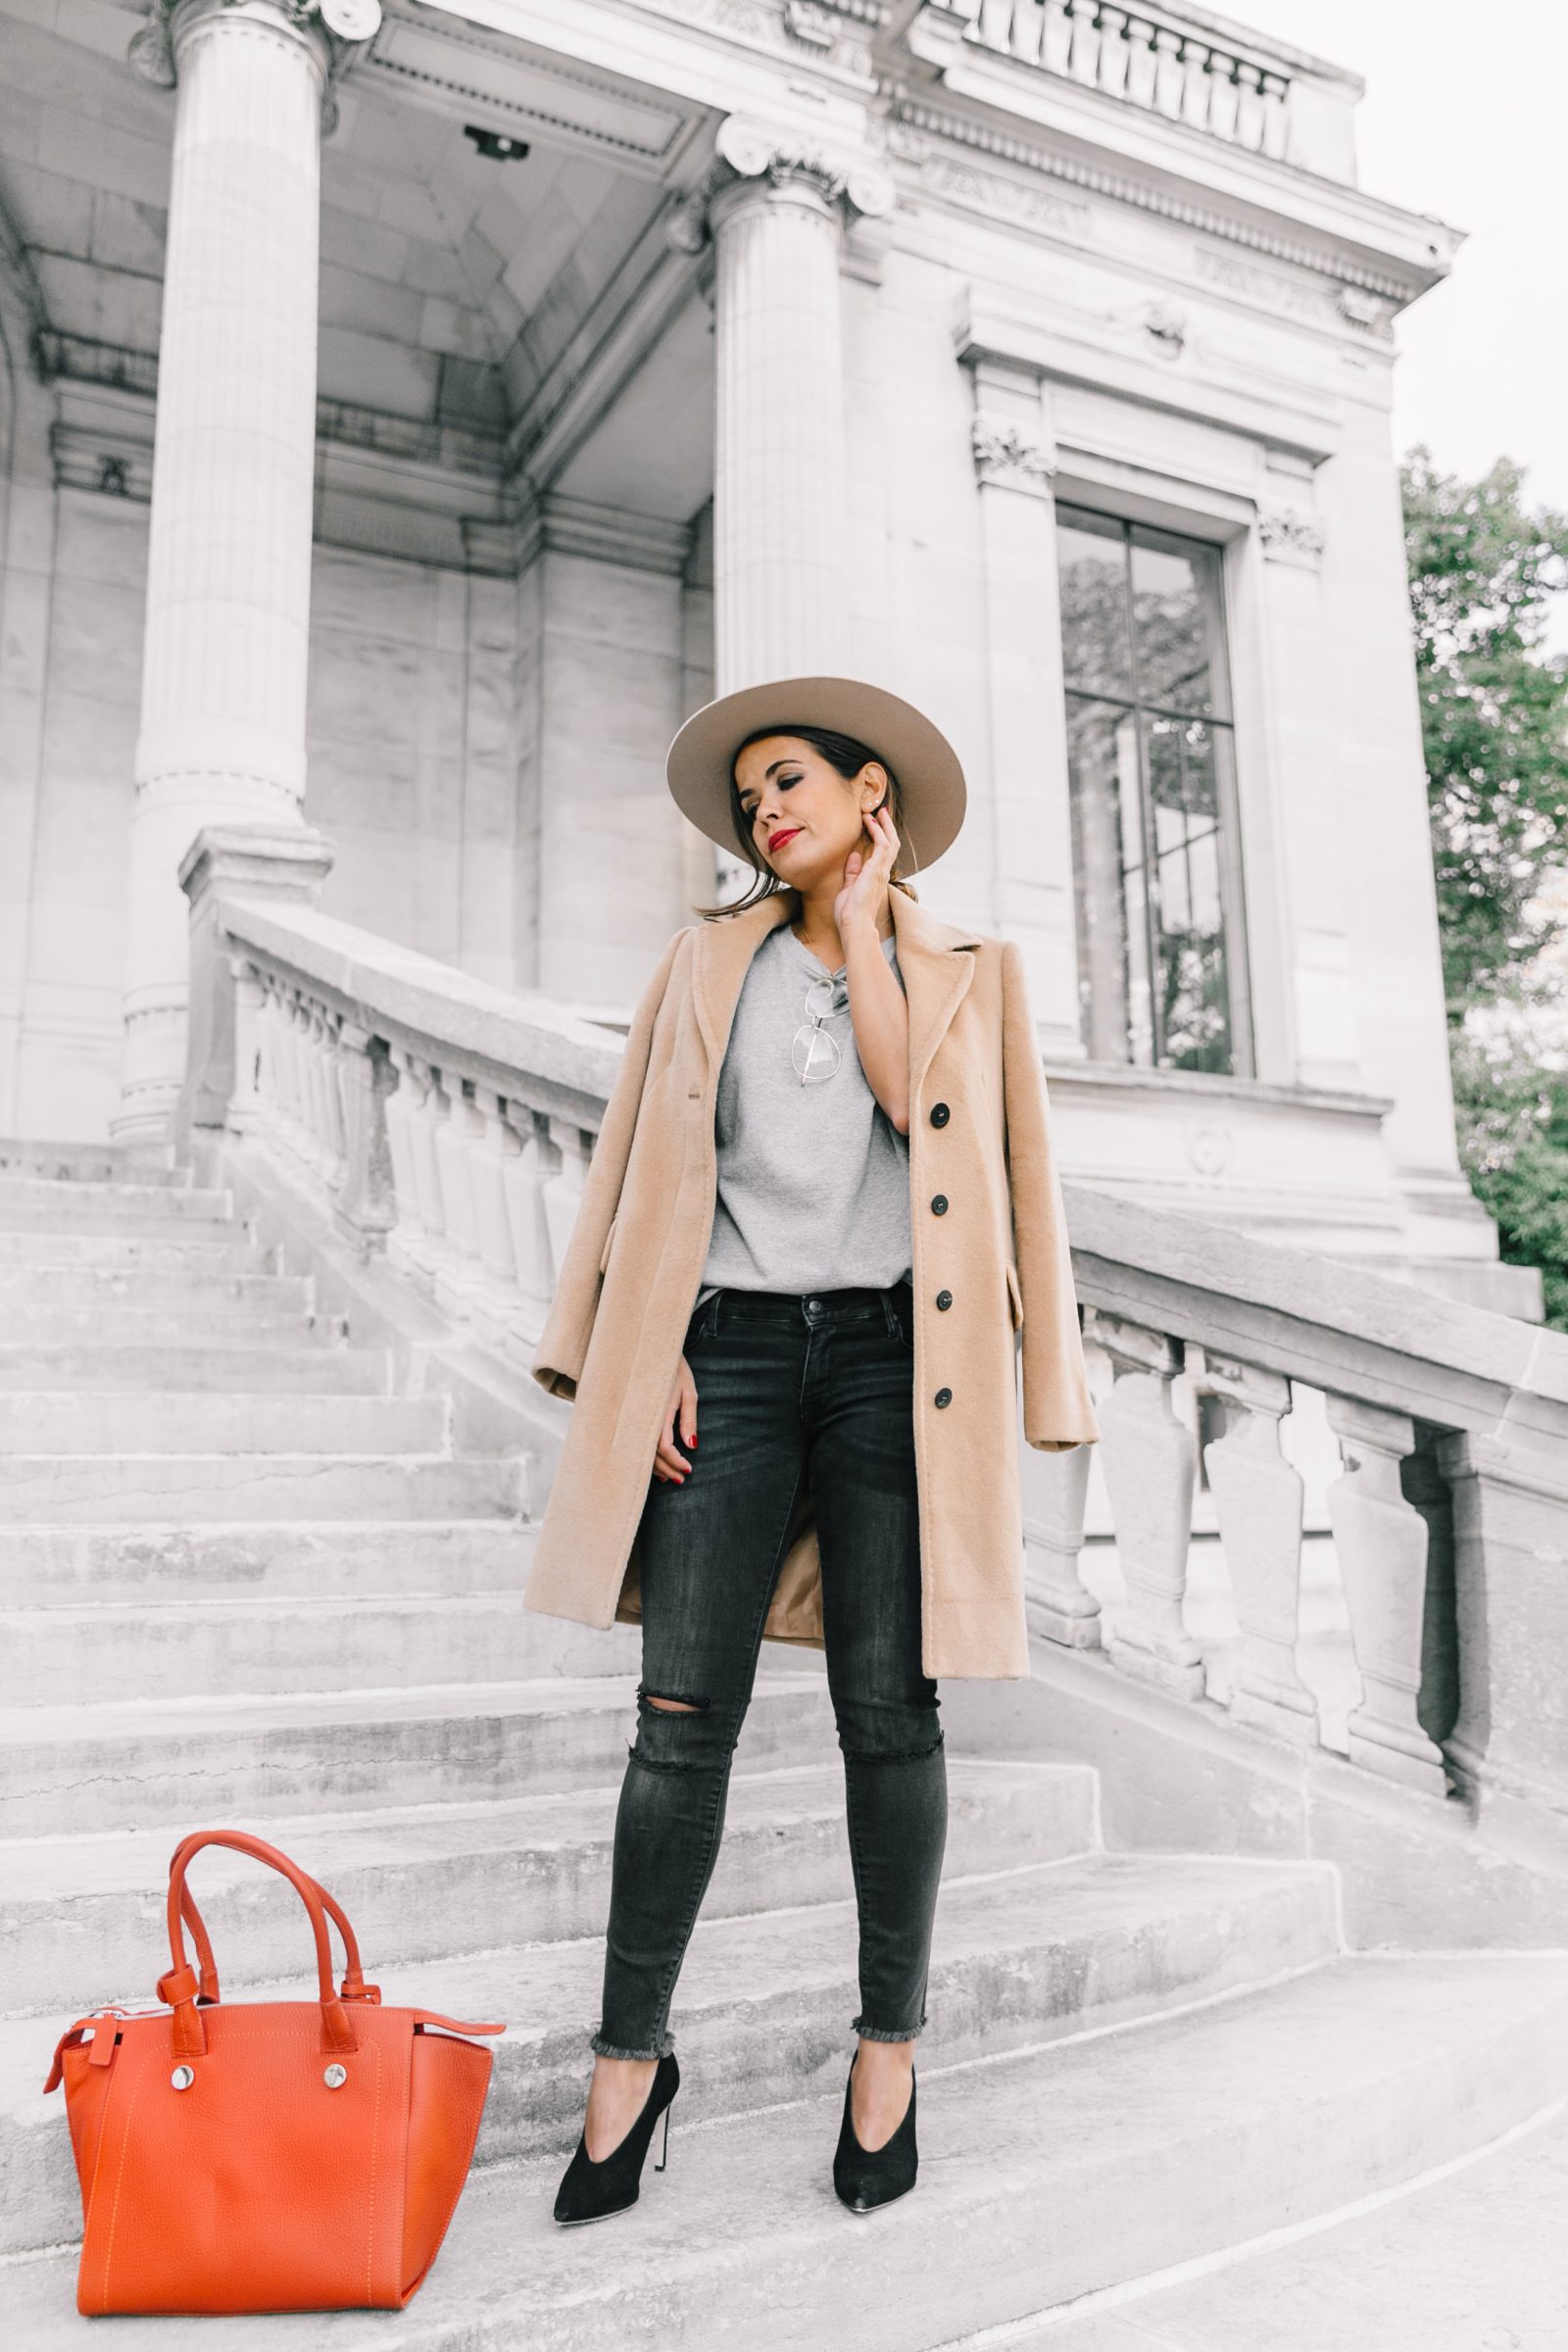 pfw-paris_fashion_week_ss17-street_style-outfits-collage_vintage-max_and_co-camel_coat-orange_bag-skinny_jeans-sandro_shoes-hat-sincerely_jules_jeans-7